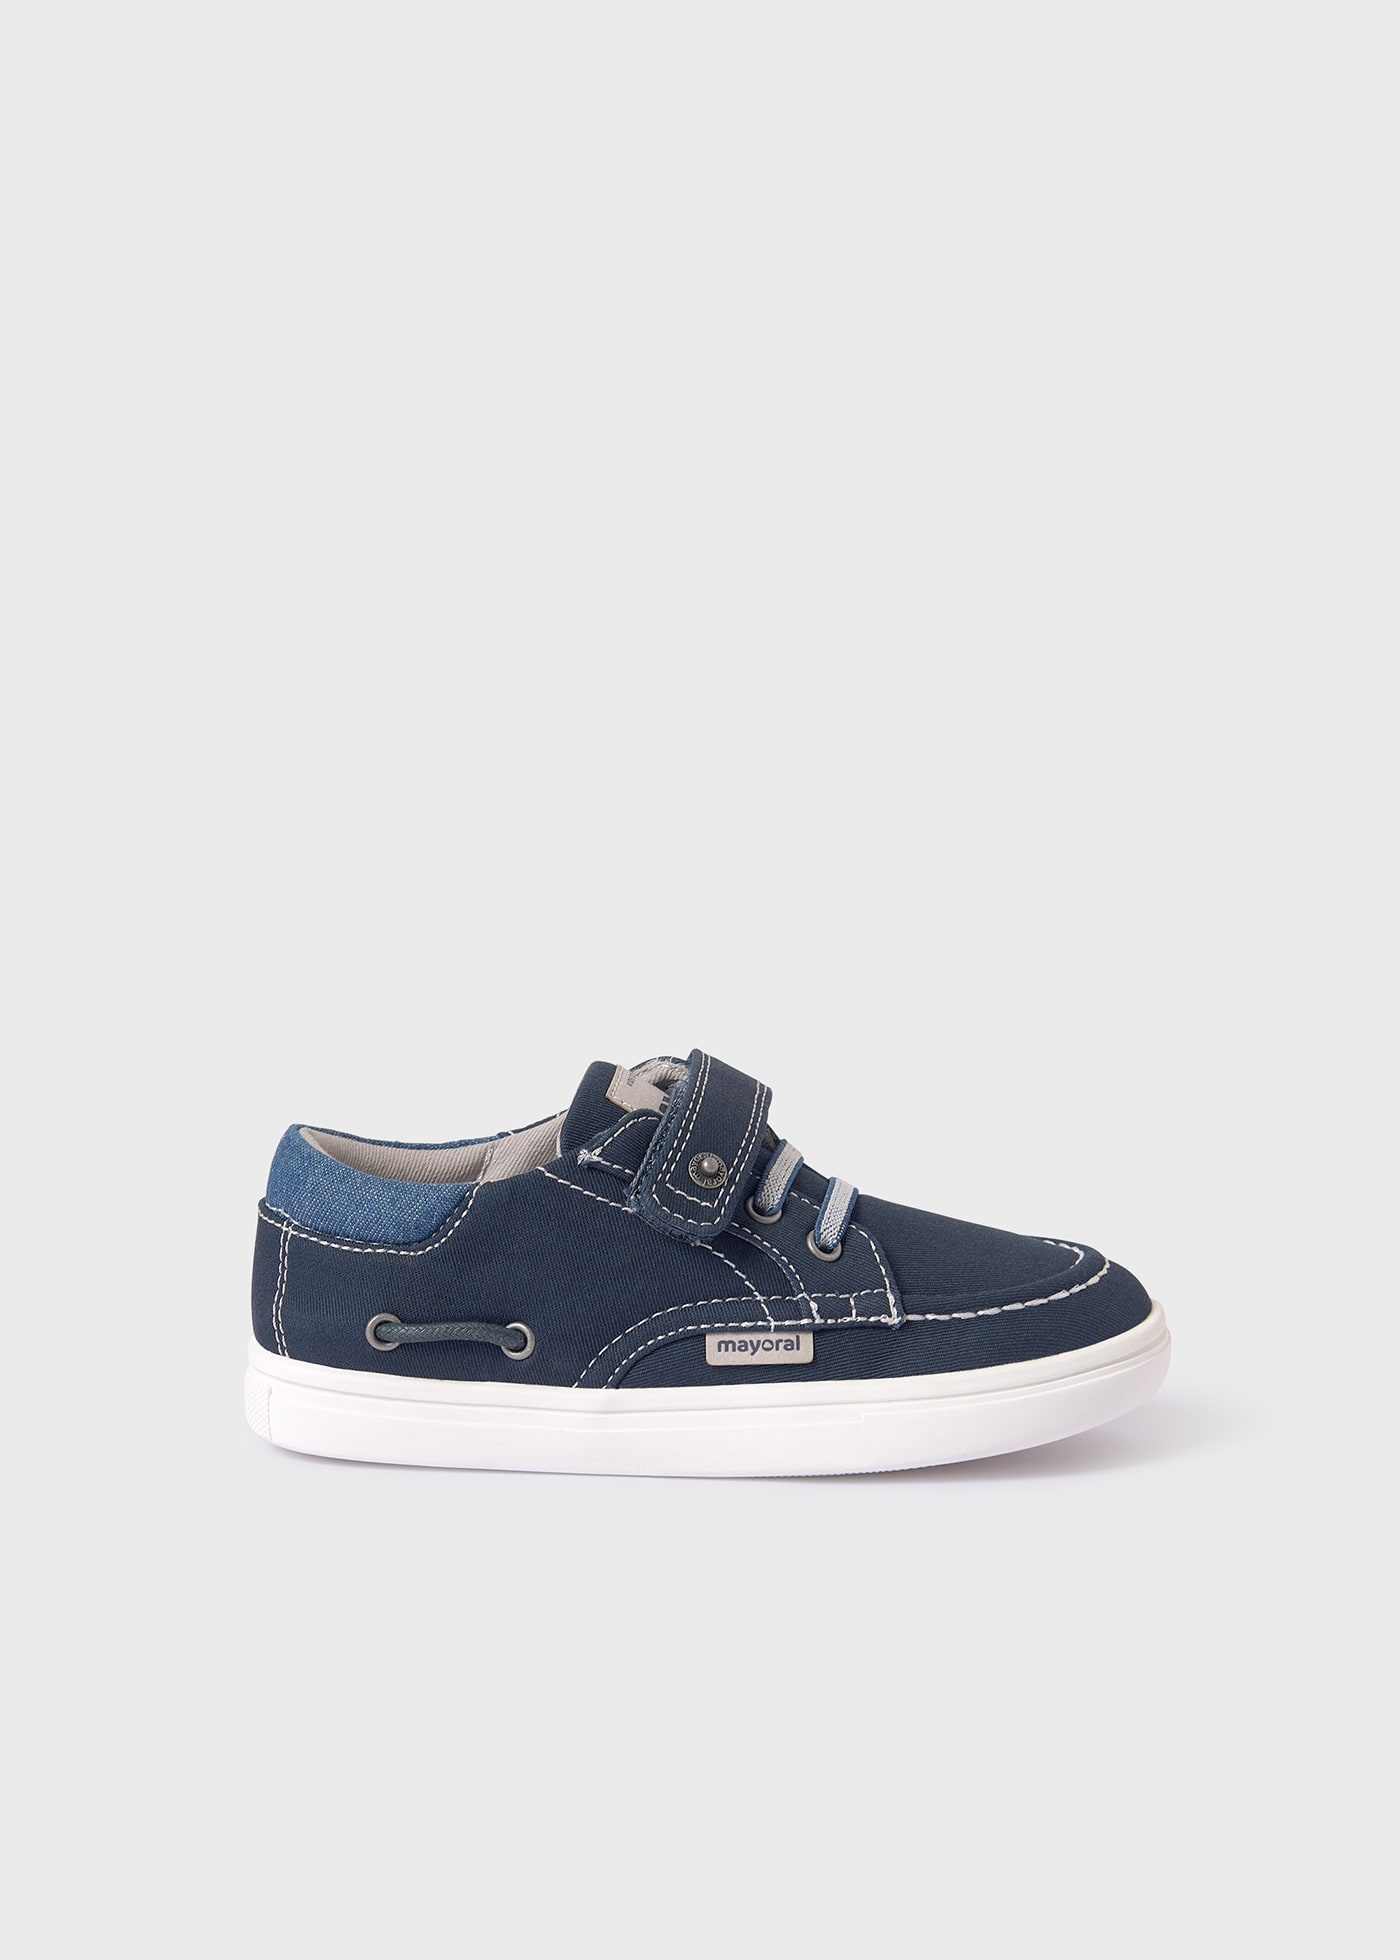 Boys boat shoes